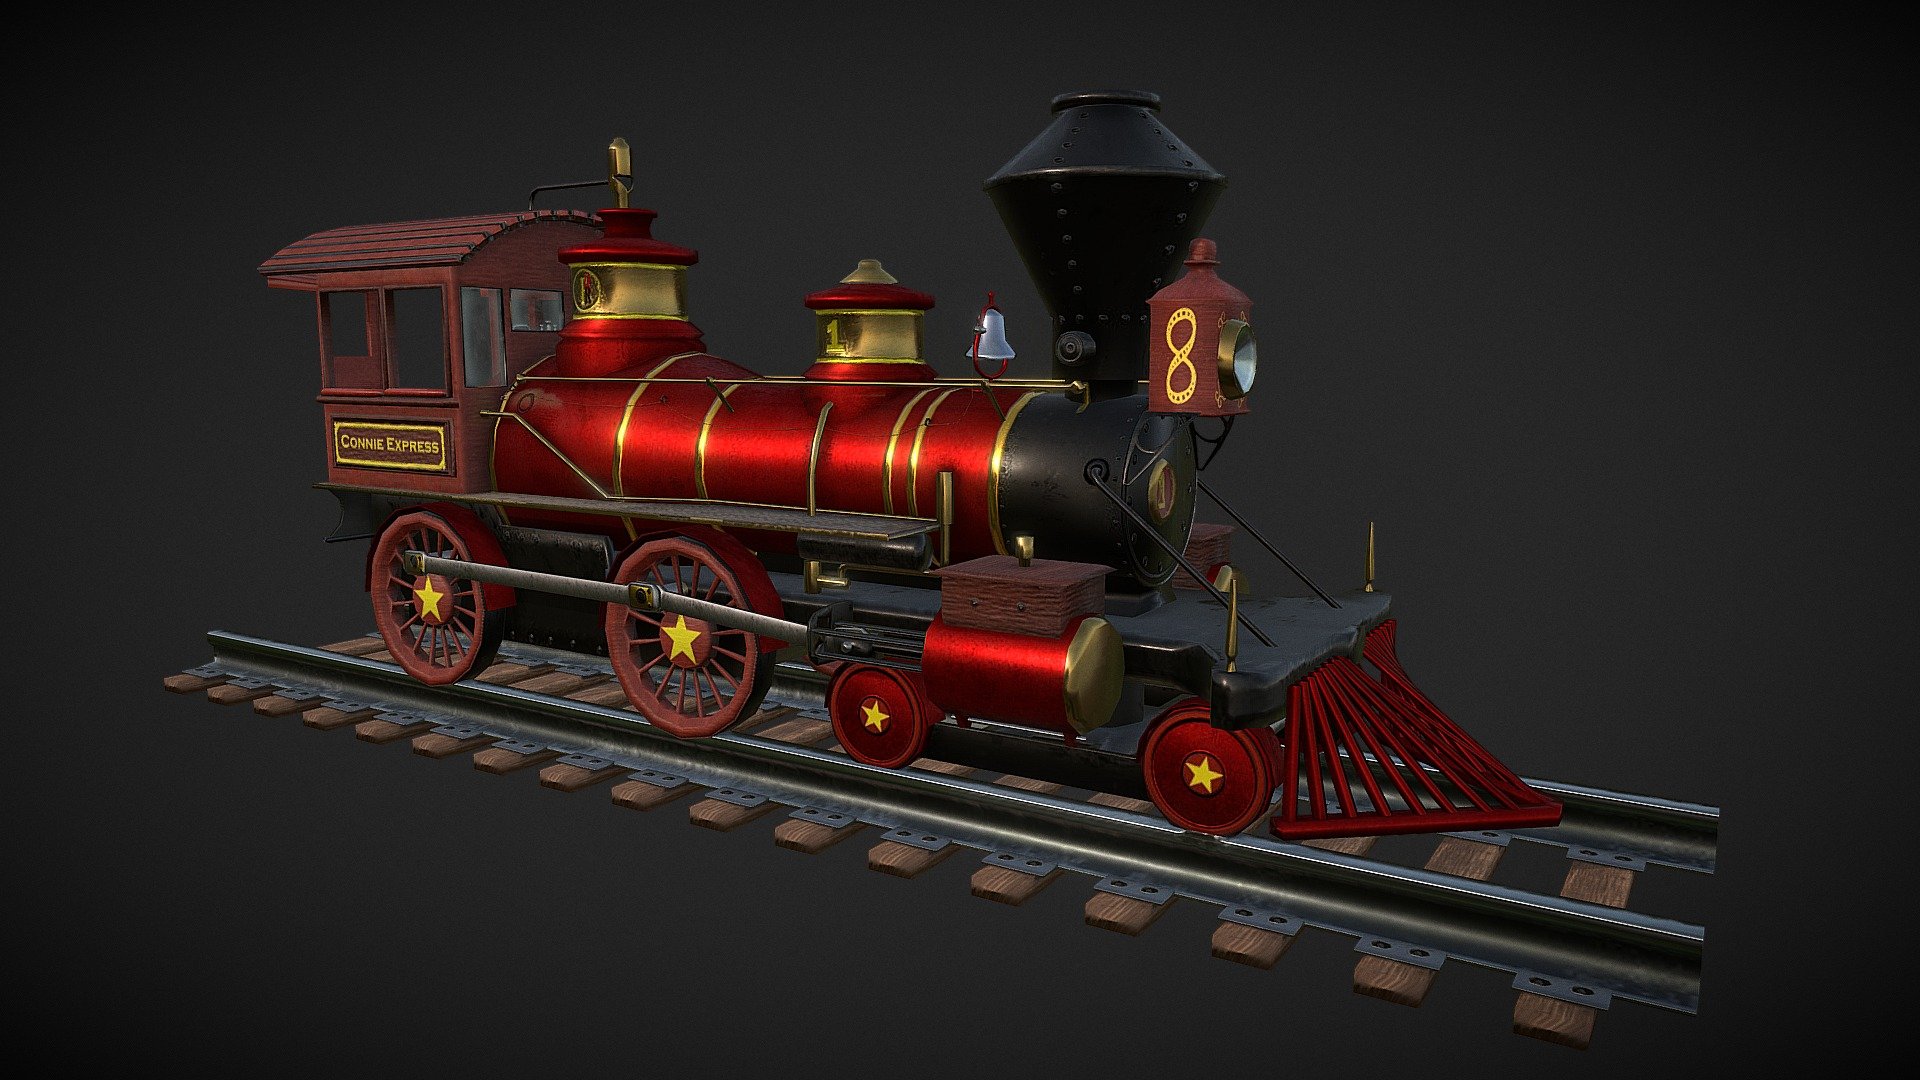 Based on the Planet Coaster train 3d model